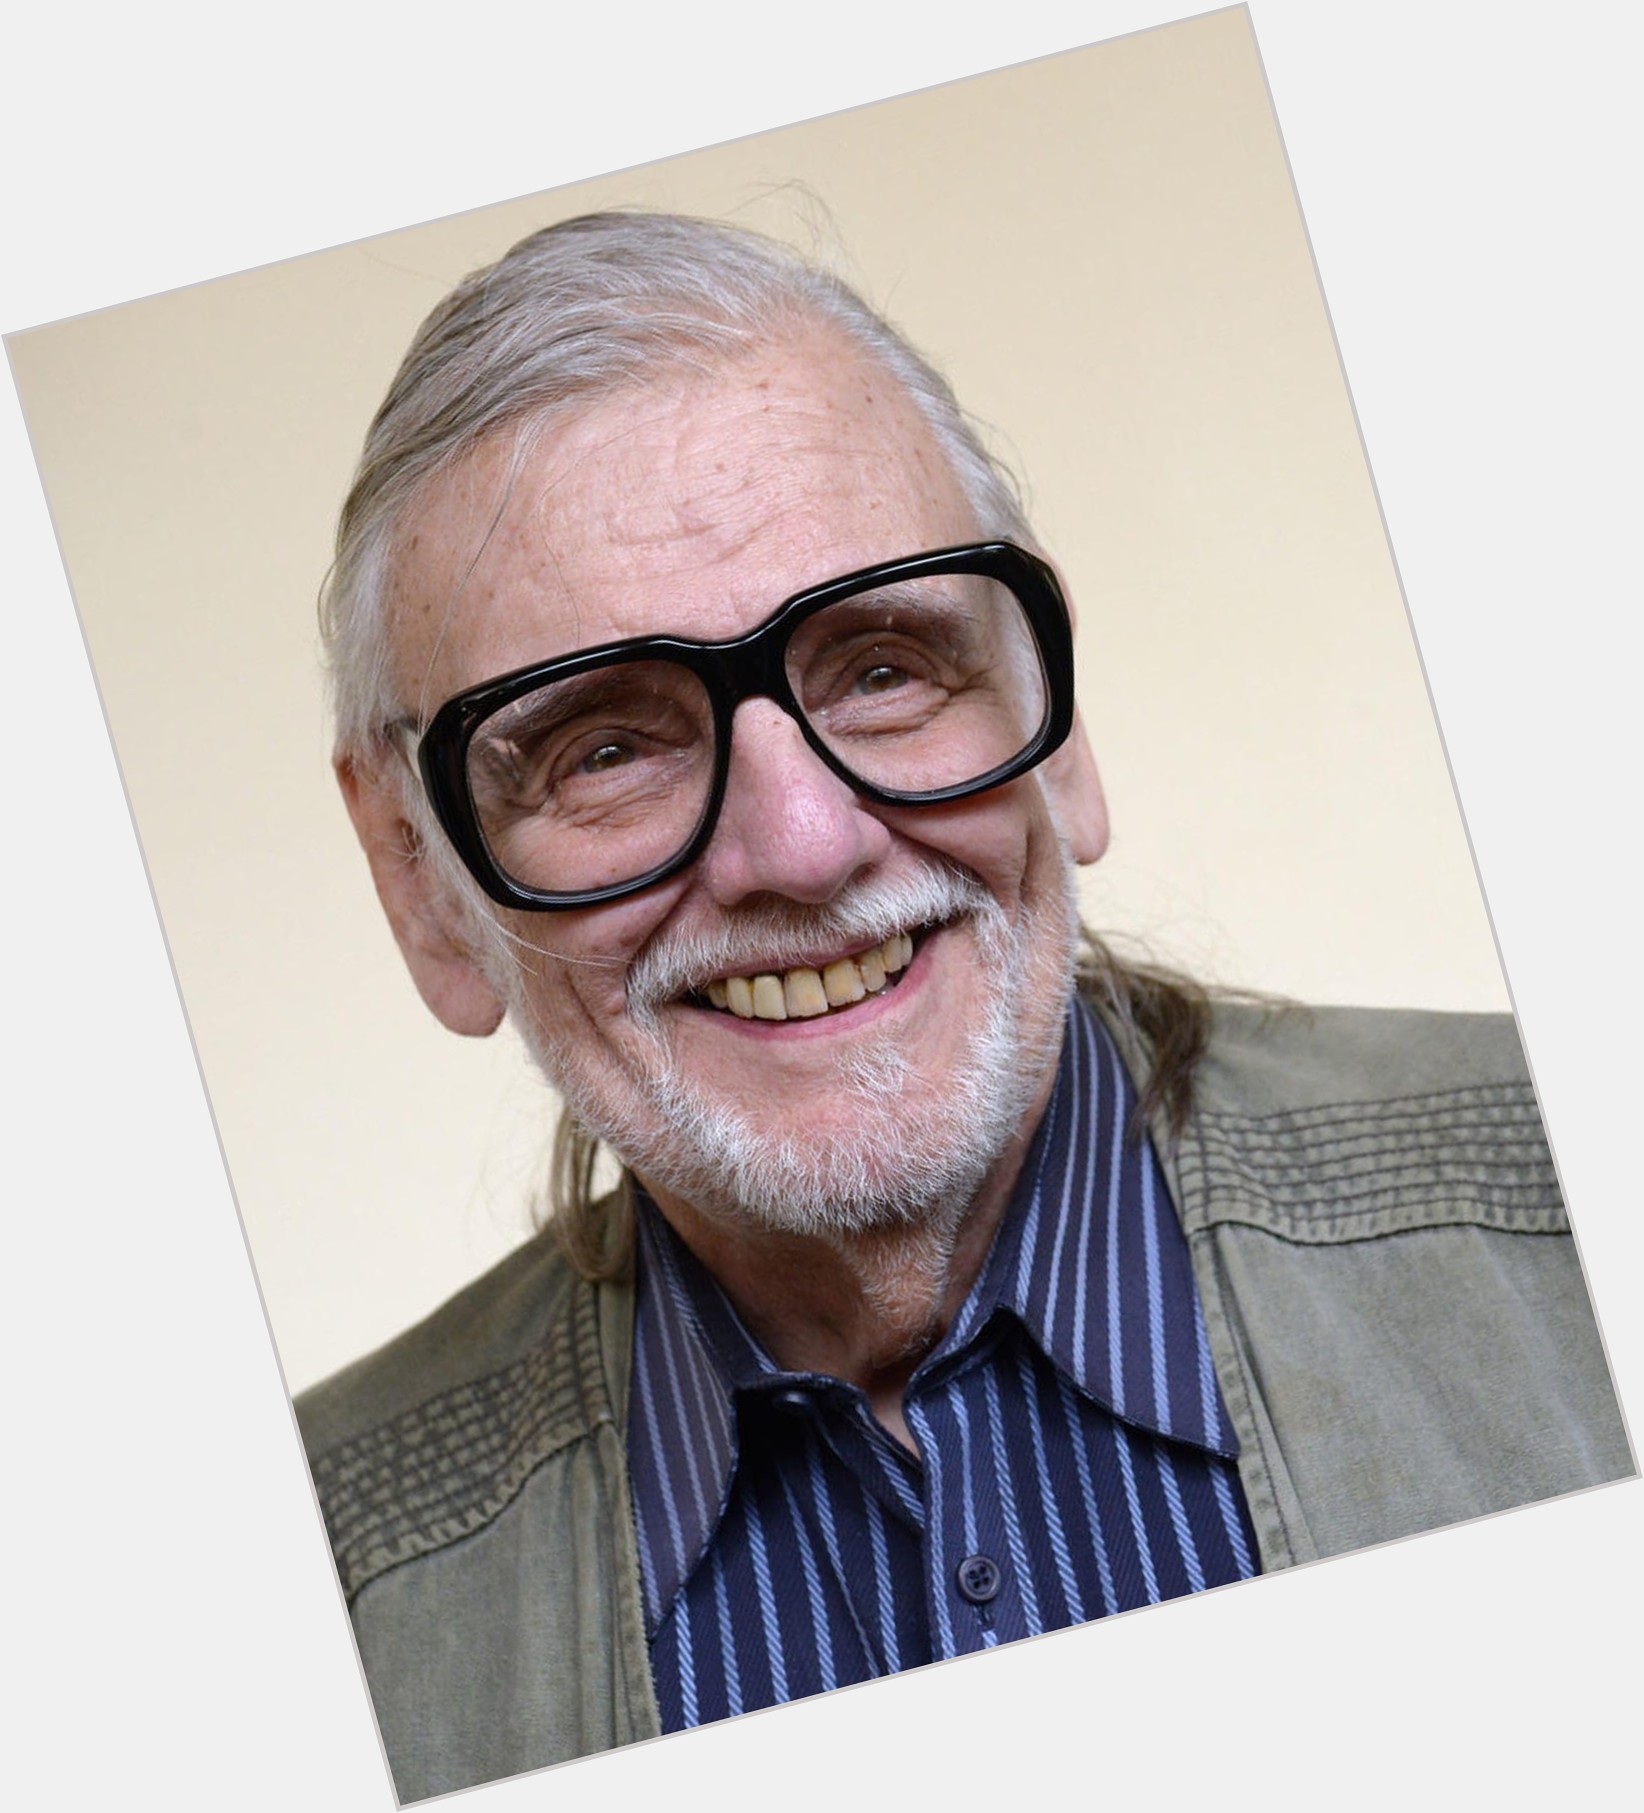 <a href="/hot-men/george-a-romero/is-he-mexican-making-another-movie-racist-filming">George A Romero</a>  